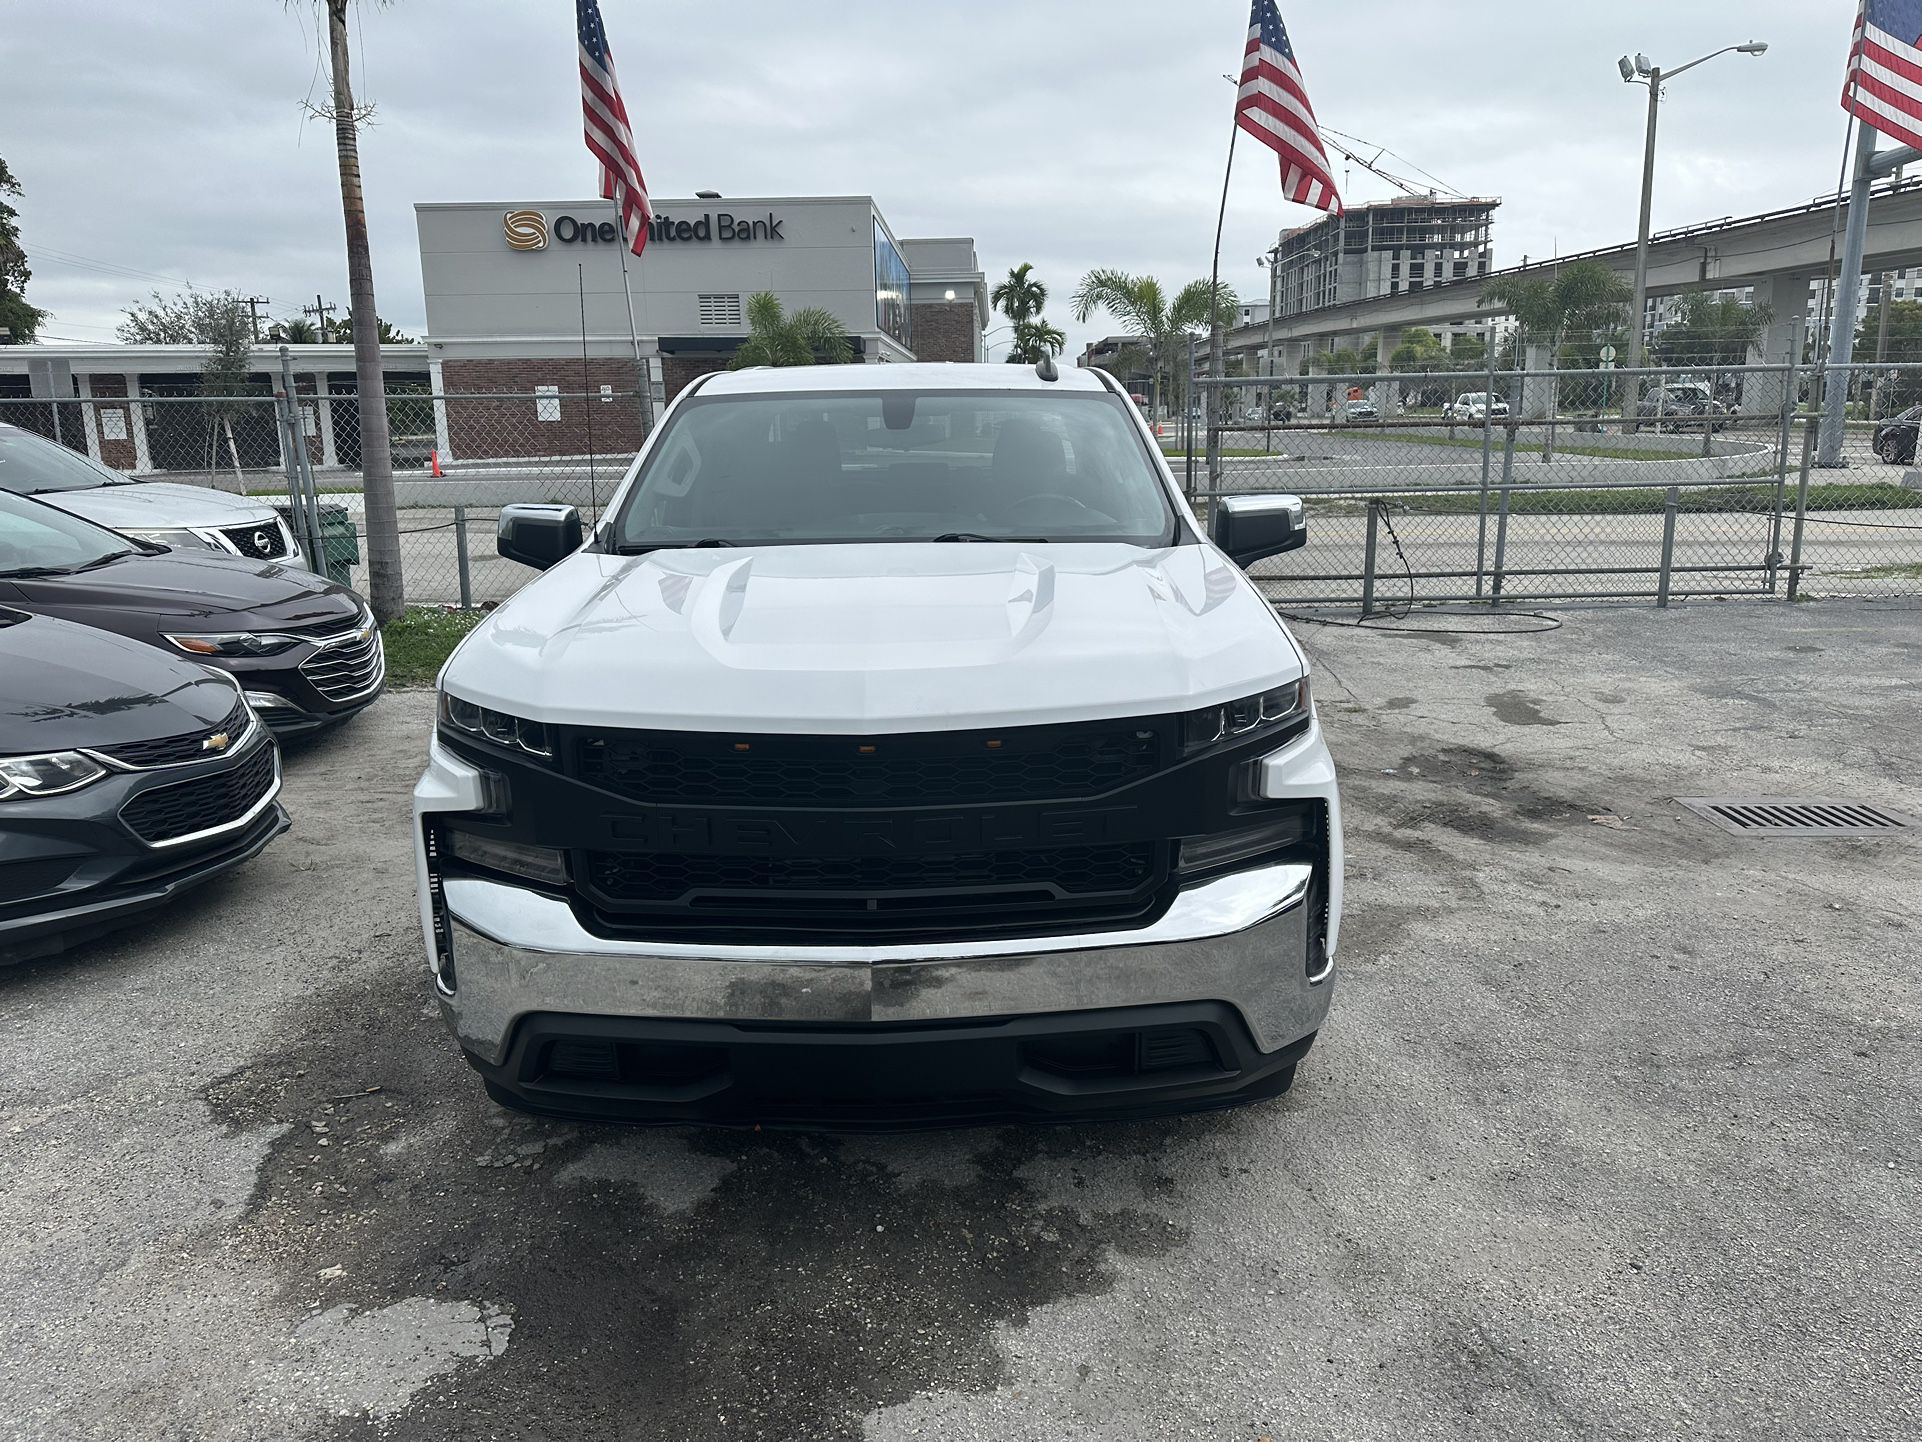 used 2020 chevy silverado - front view 1